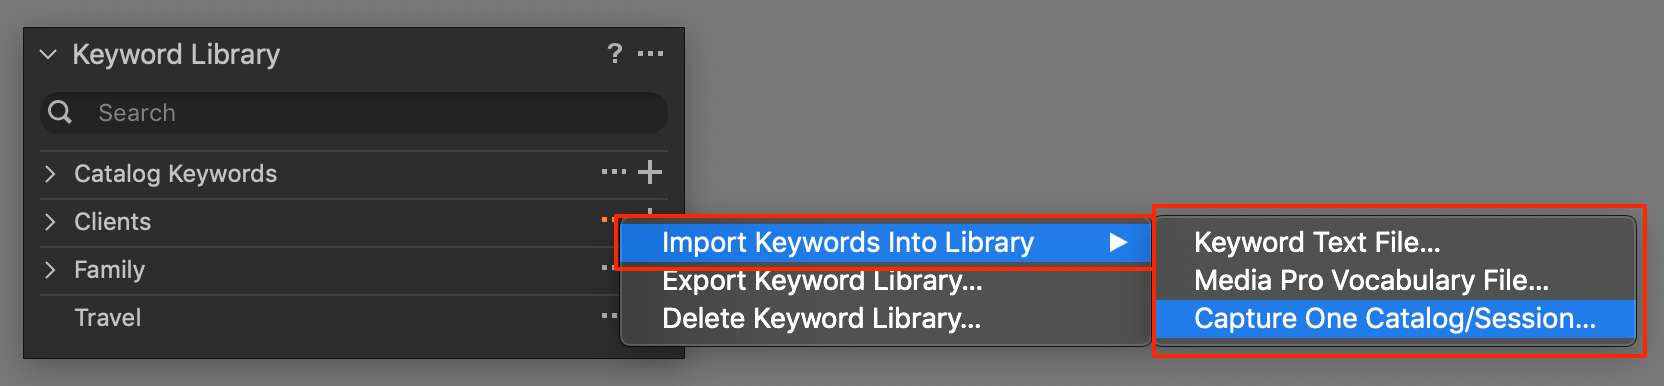 import keywords into keyword library, capture one 20